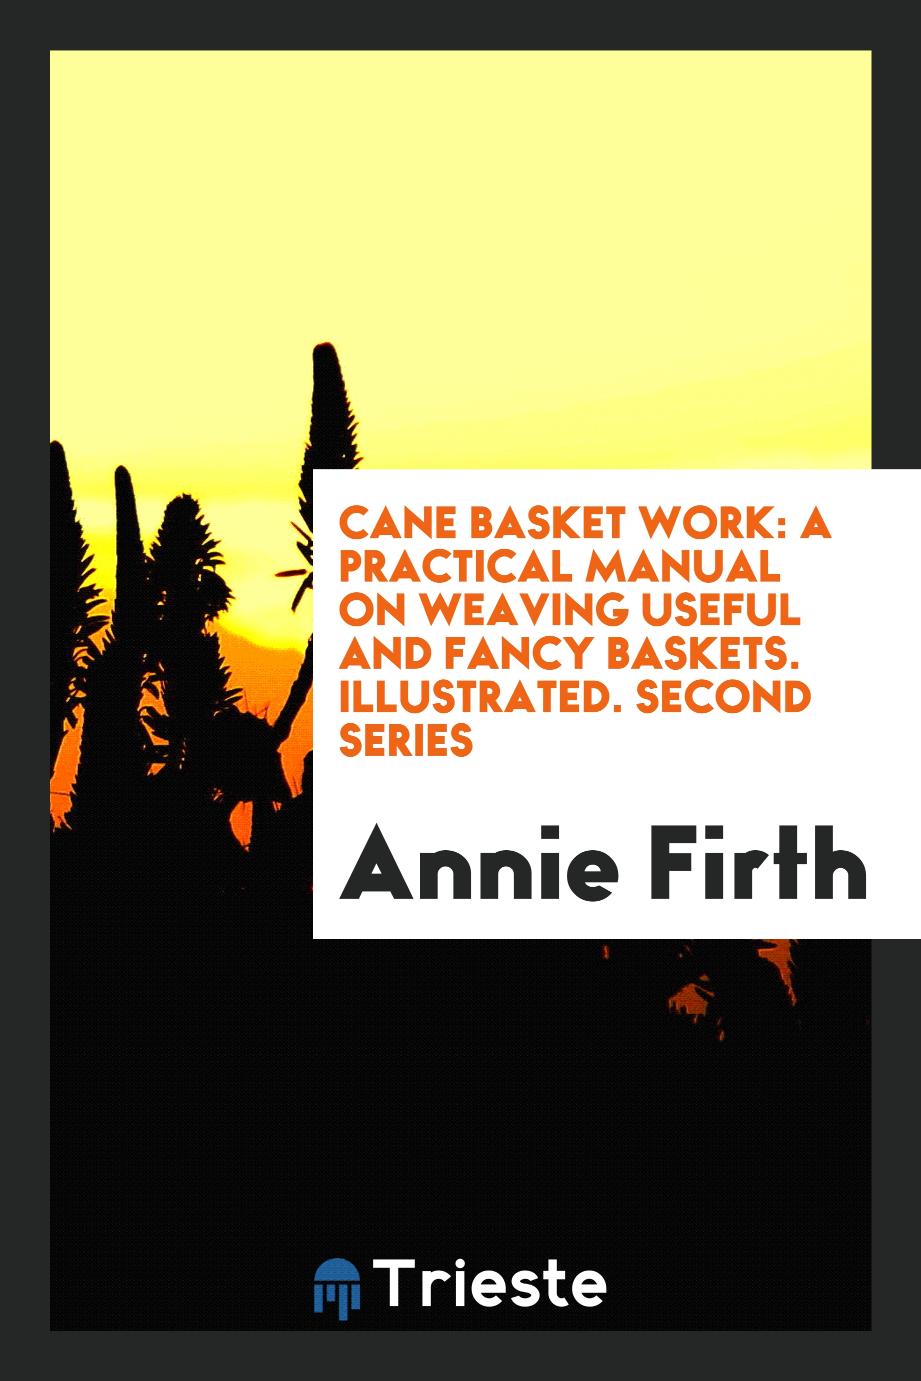 Cane Basket Work: A Practical Manual on Weaving Useful and Fancy Baskets. Illustrated. Second Series